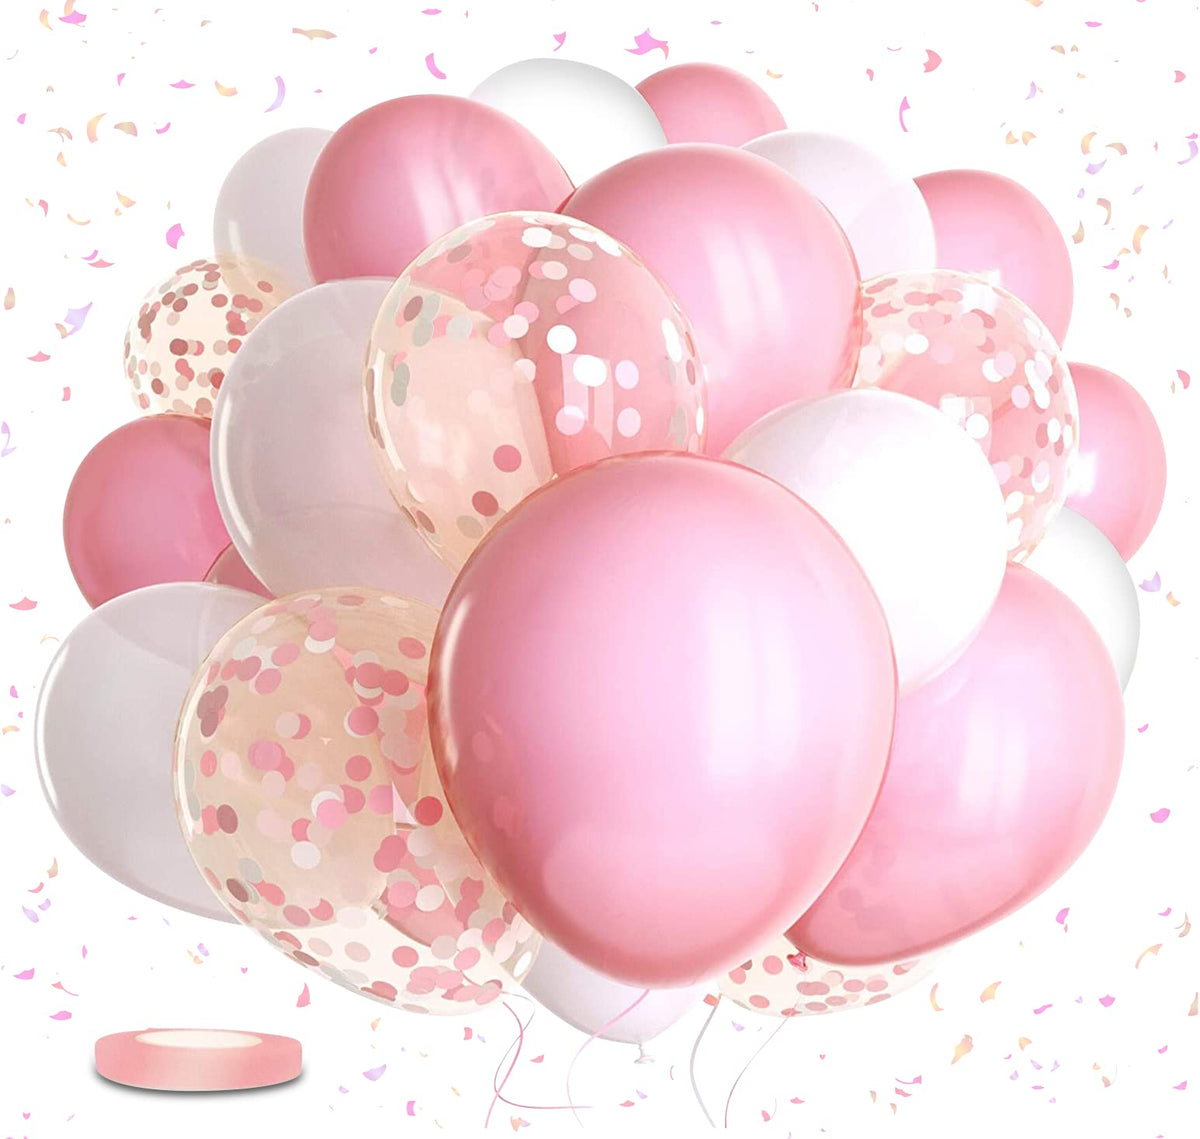 OHugs Pink Balloons - 31 Pcs Set of 12 Inch 15 Pink Balloons, 10 White Balloons, 5 Pink and White Confetti Balloons, 1 Ribbon for Bridal Shower, Baby Shower, Birthday Party, Gender Reveal, Wedding